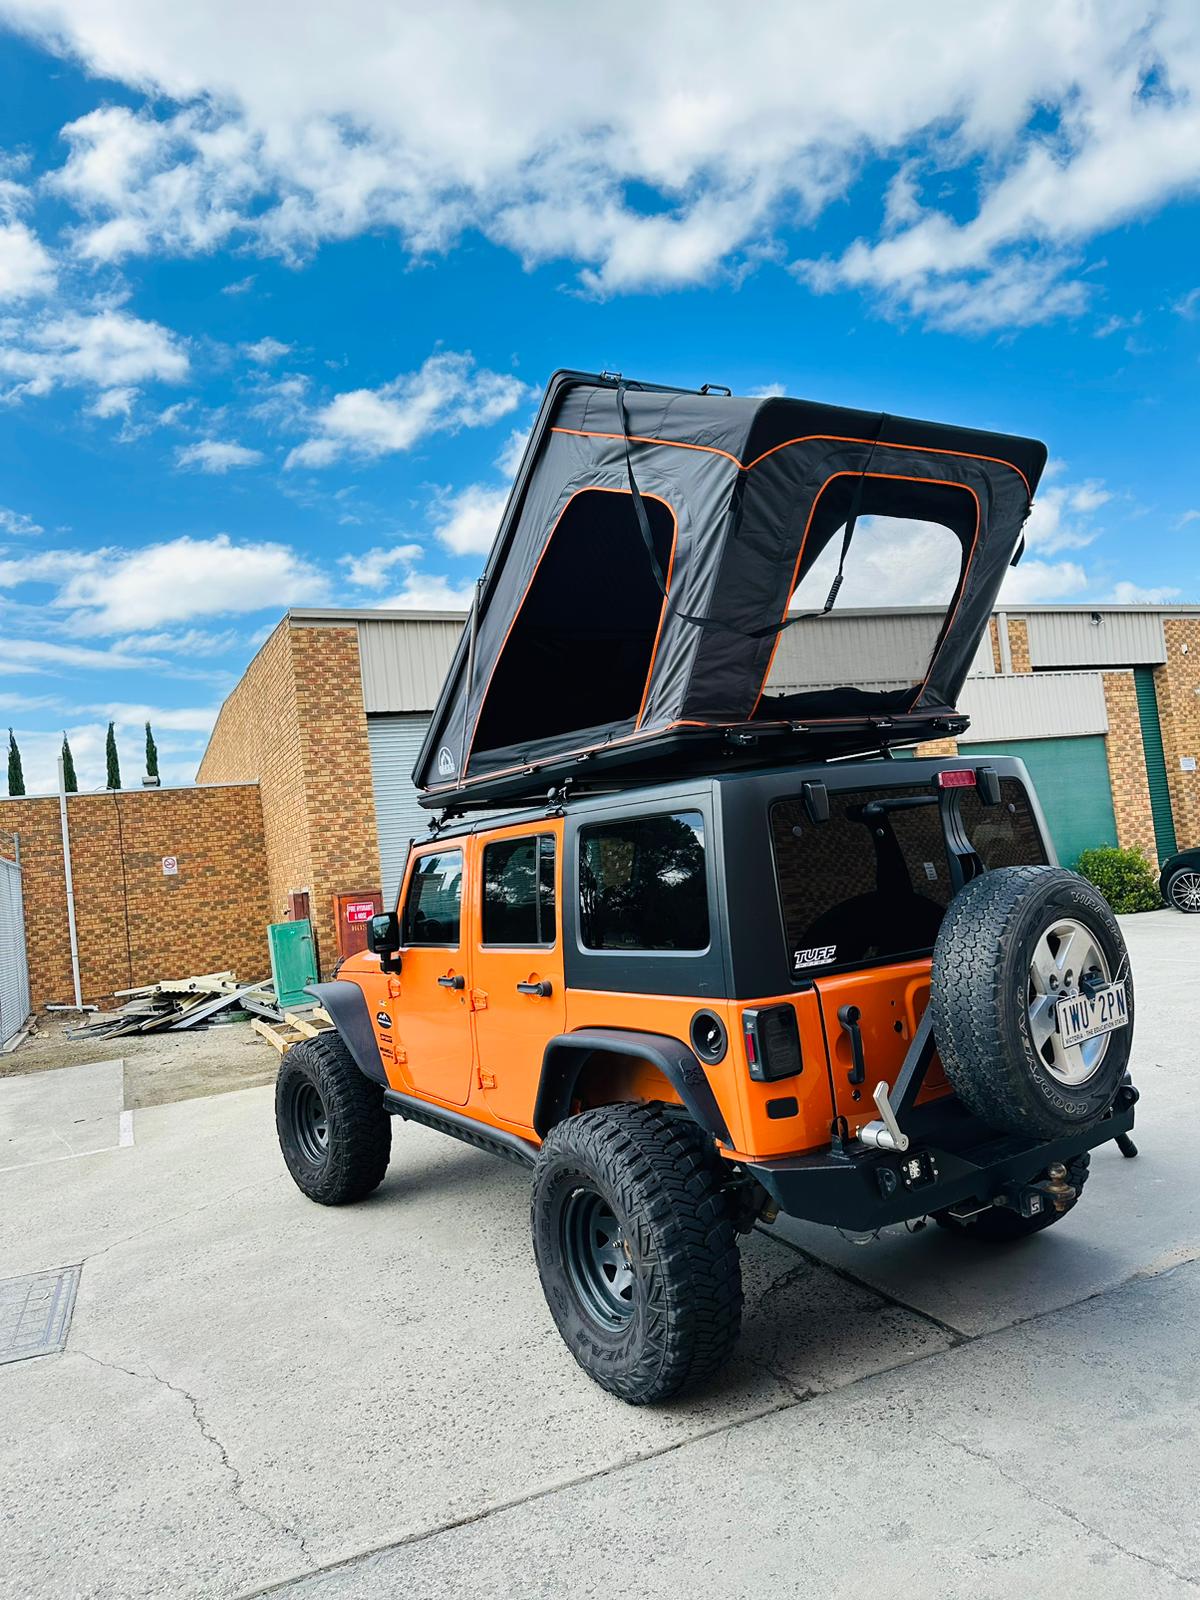 Superior rooftop tent on the car